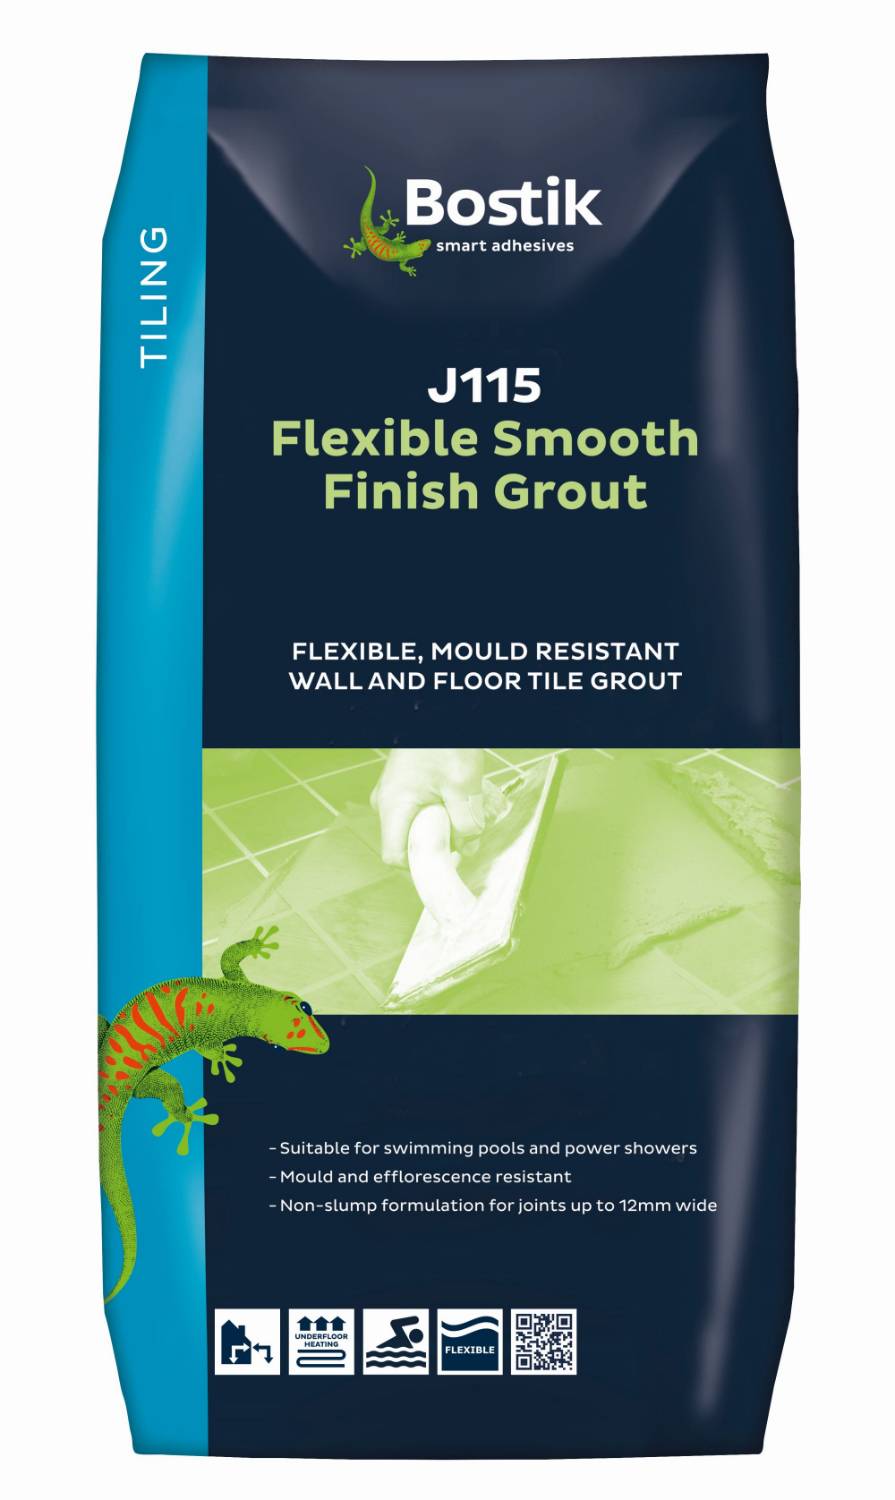 Bostik J115 Flexible Smooth Finish Grout - Tiling grout  